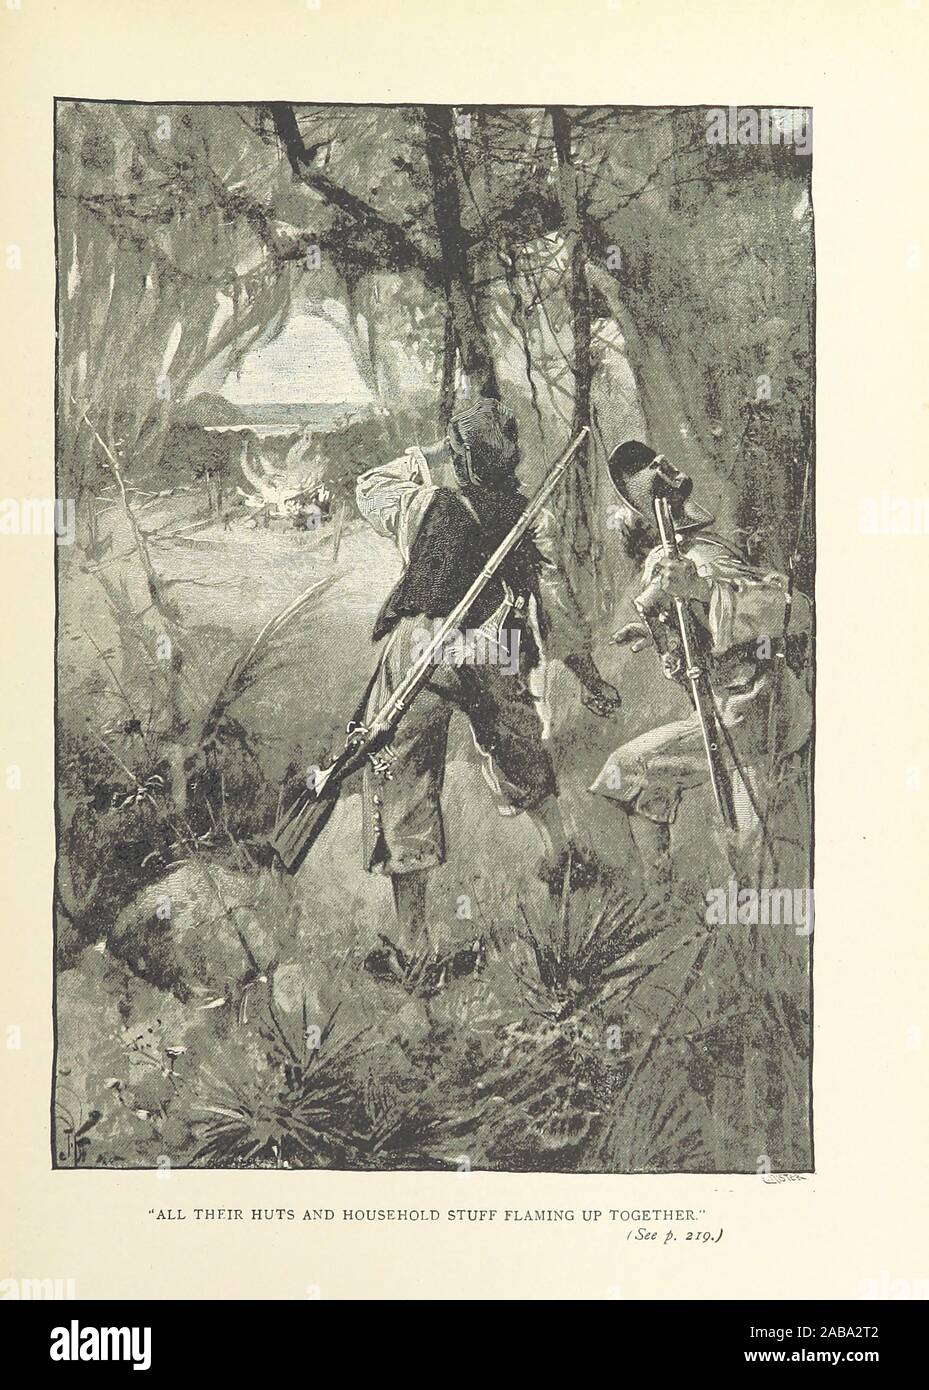 The Life and Strange Surprising Adventures of Robinson Crusoe of York Mariner as Related by Himself, by Daniel Defoe. Illustrated, London 1895, Stock Photo